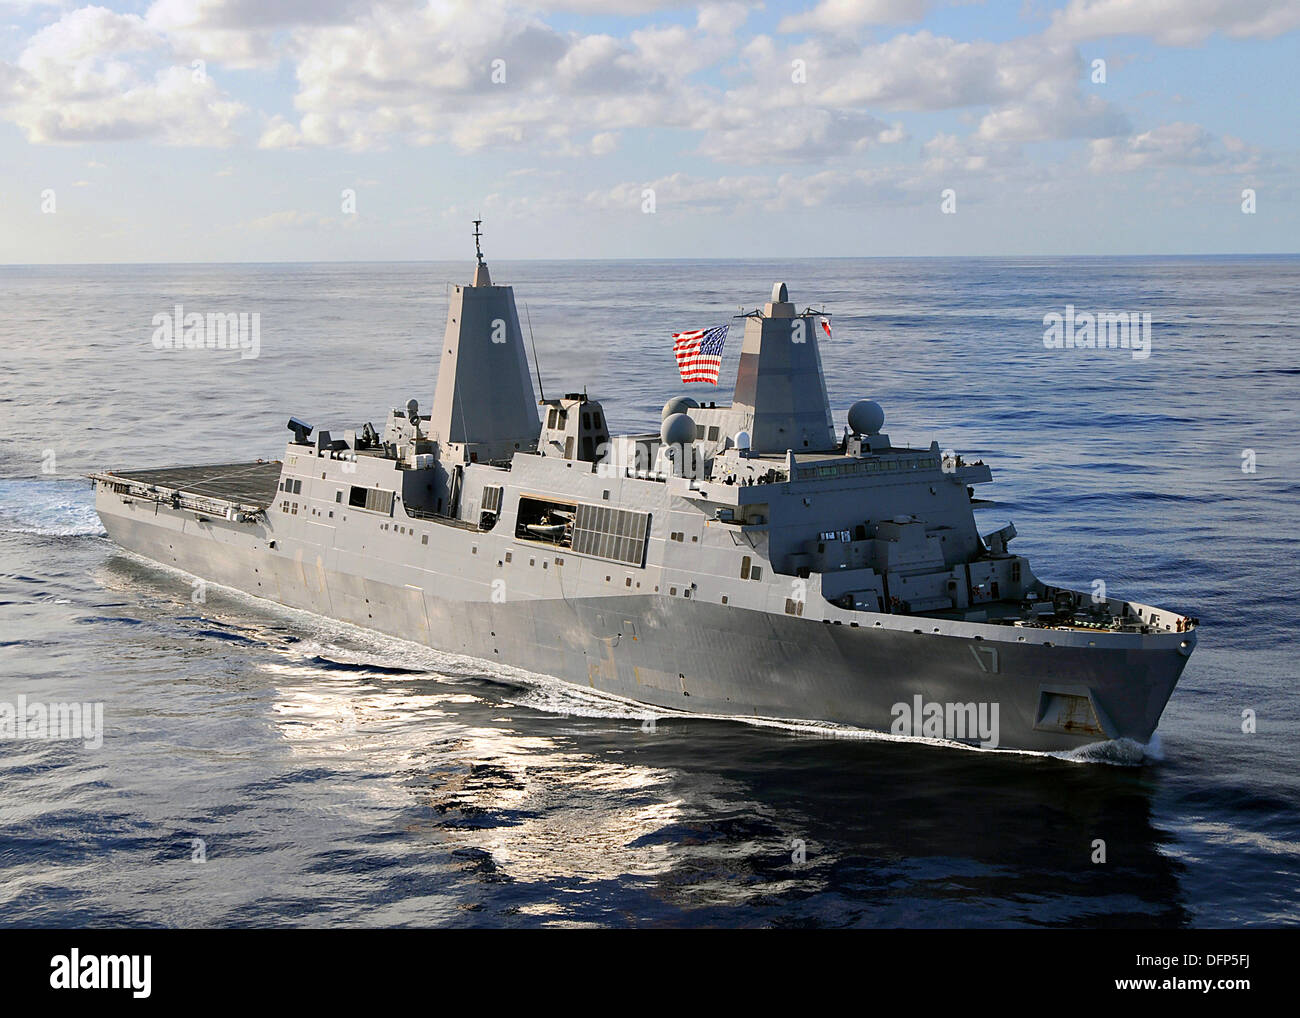 The US Navy USS San Antonio amphibious transport dock ship during operations September 6, 2009 in the Atlantic Ocean. Terrorist Abu Anas al Libi is currently being held on the San Antonio after his capture October 5, 2013 in Libya. Stock Photo